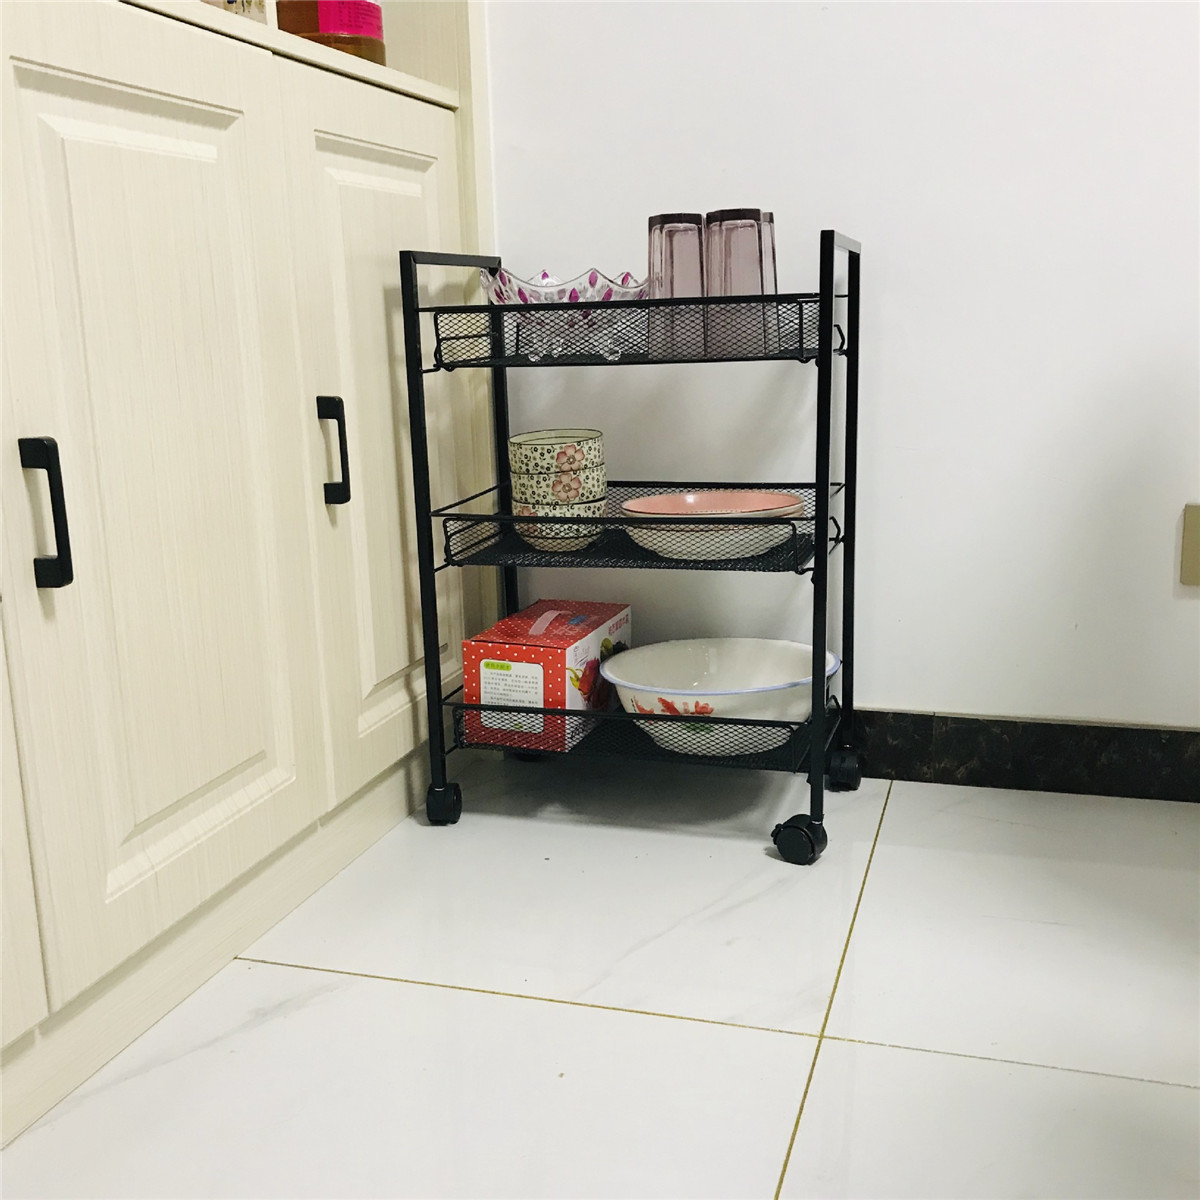 3/4 Layers Movable Shelf Kitchen Organizer Iron Storage Baskets Removable Holder with Universal Wheel Trolley for Kitchen Bathroom Bedroom